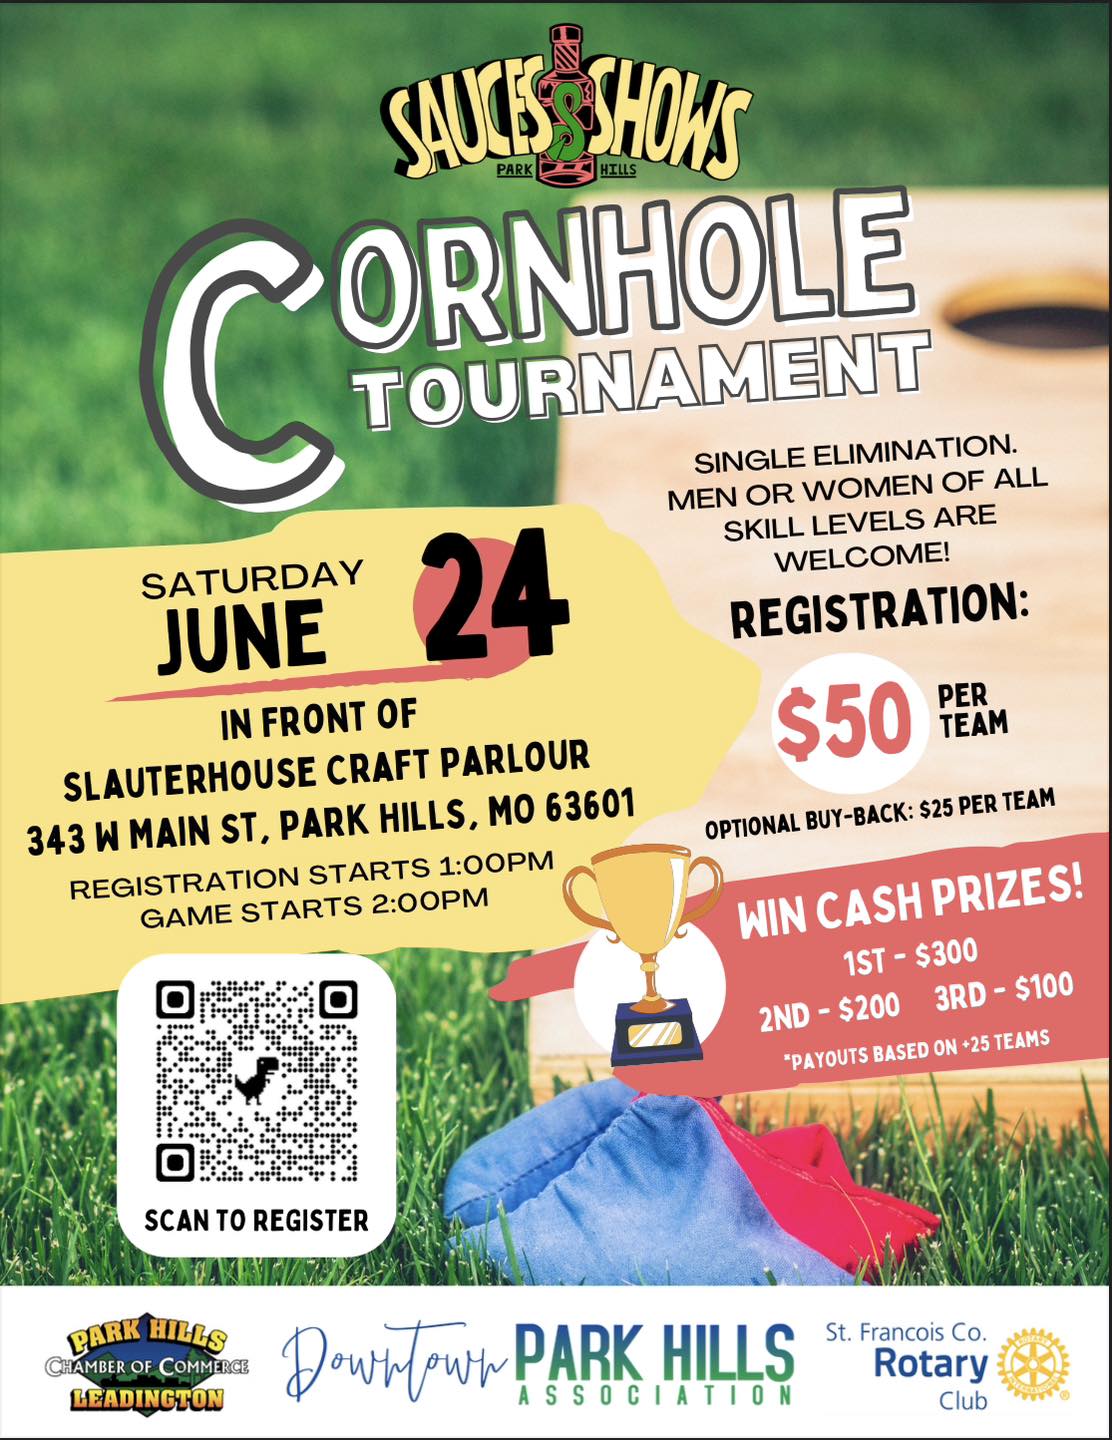 Cornhole Tournament at Sauces and Shows